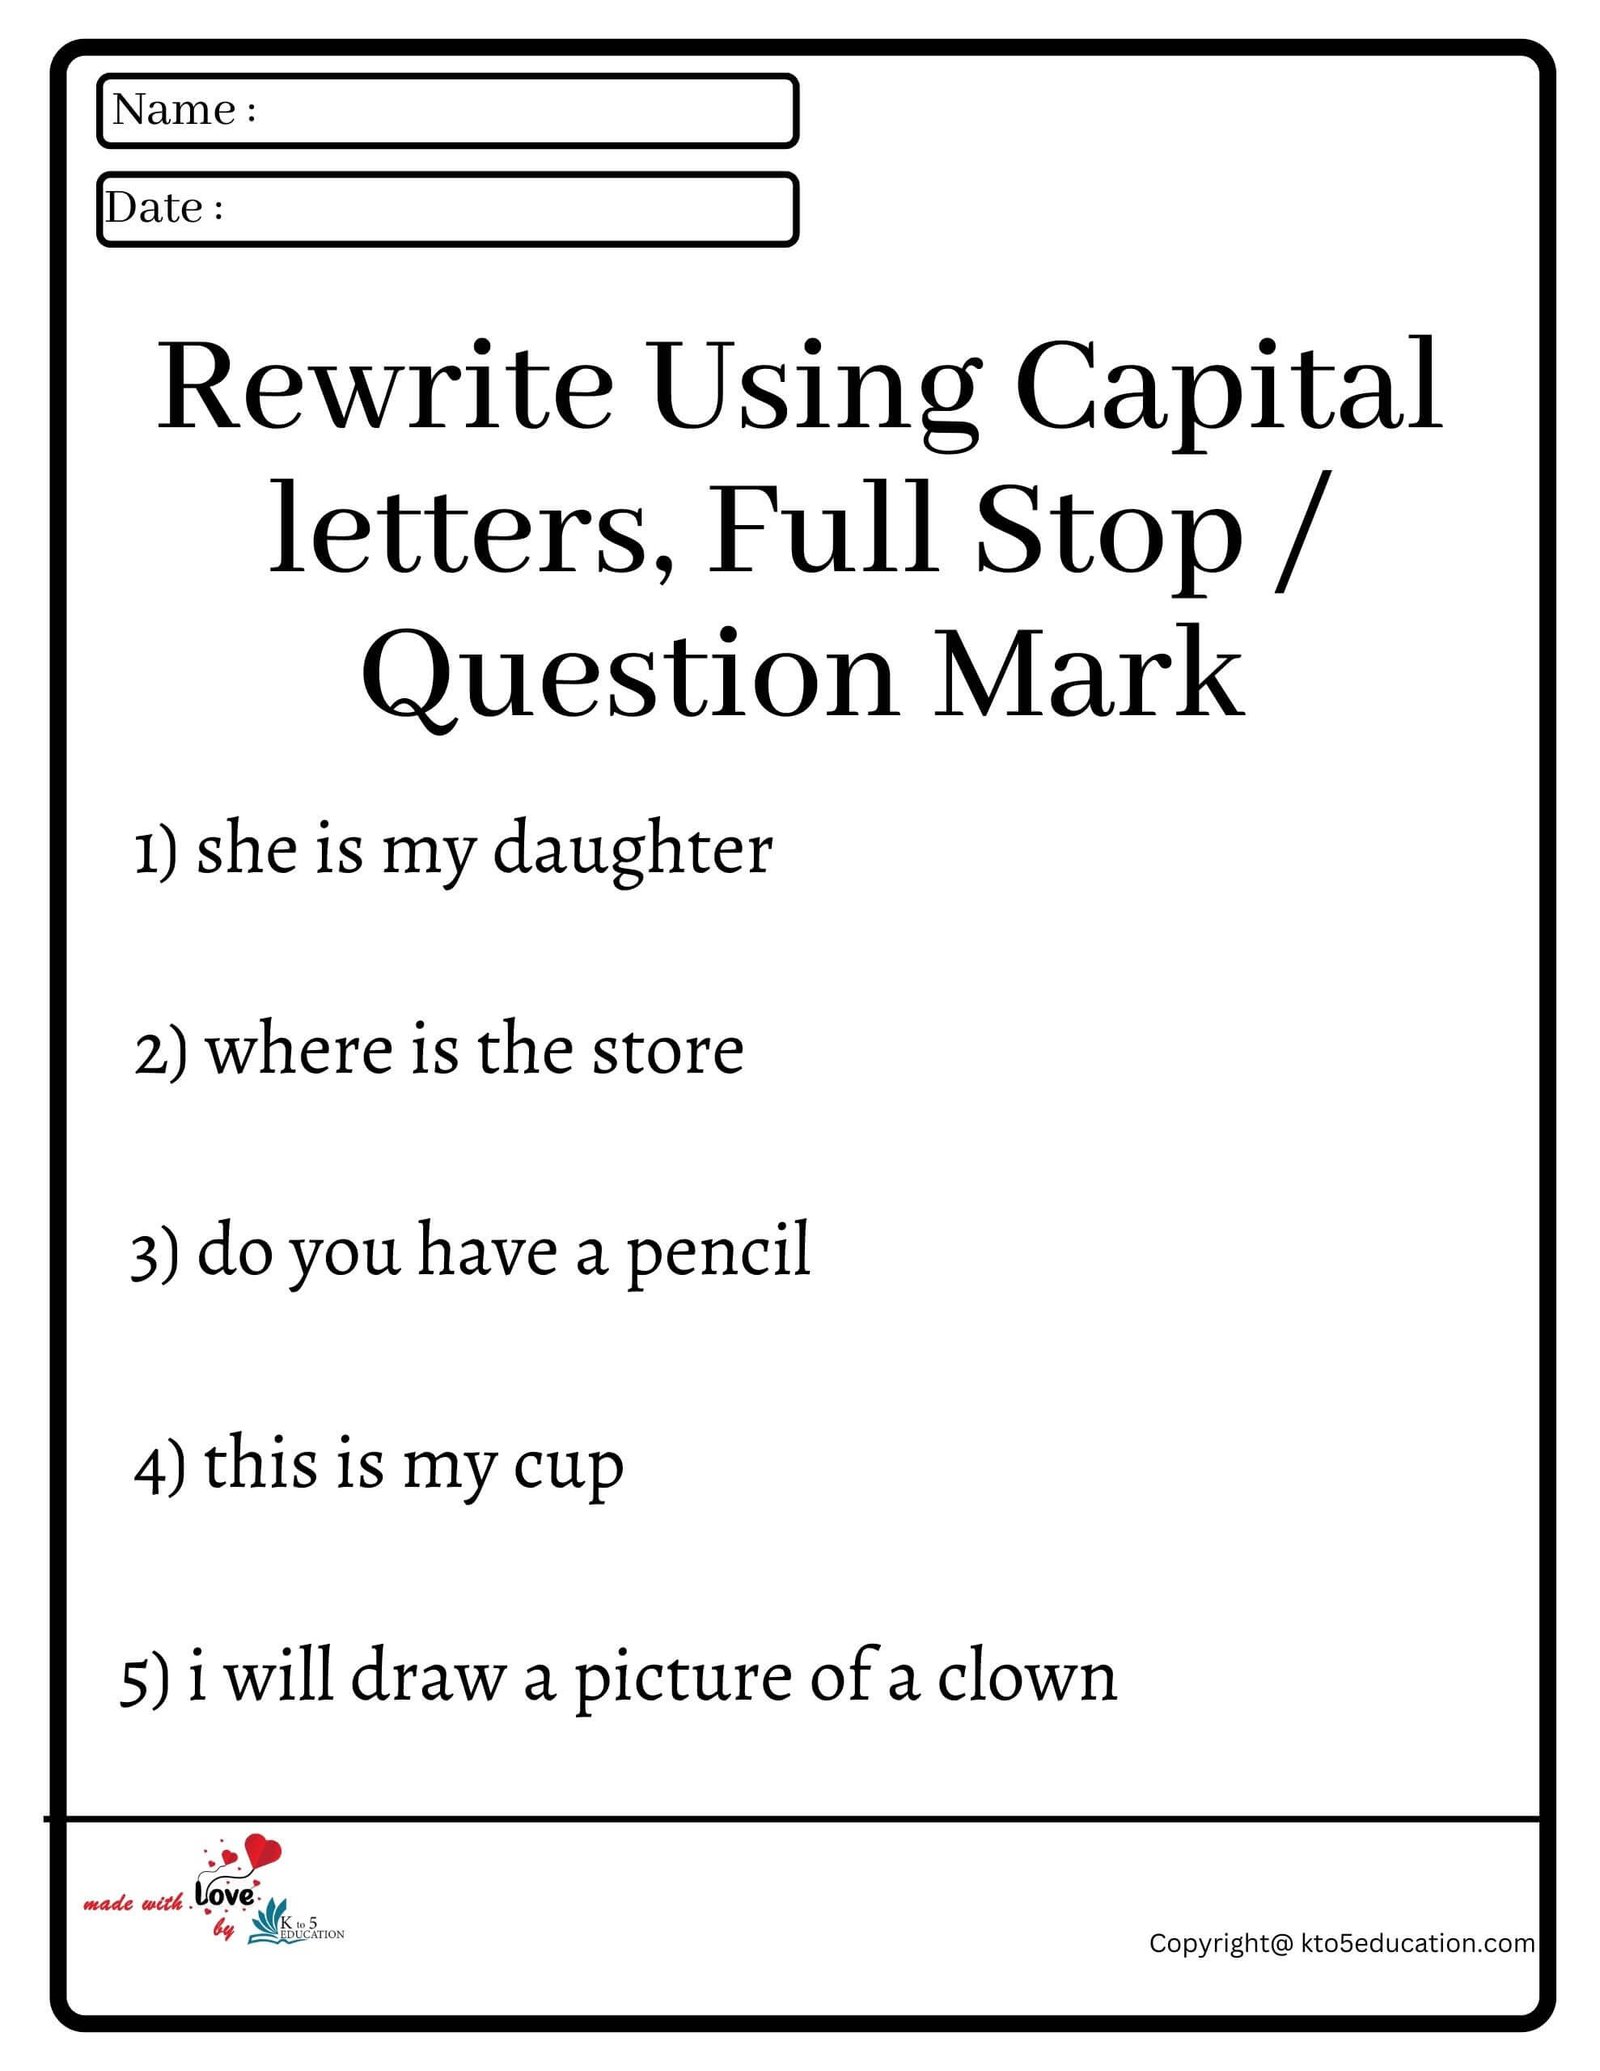 Rewrite Using Capital letters Full Stop Question Mark Worksheet